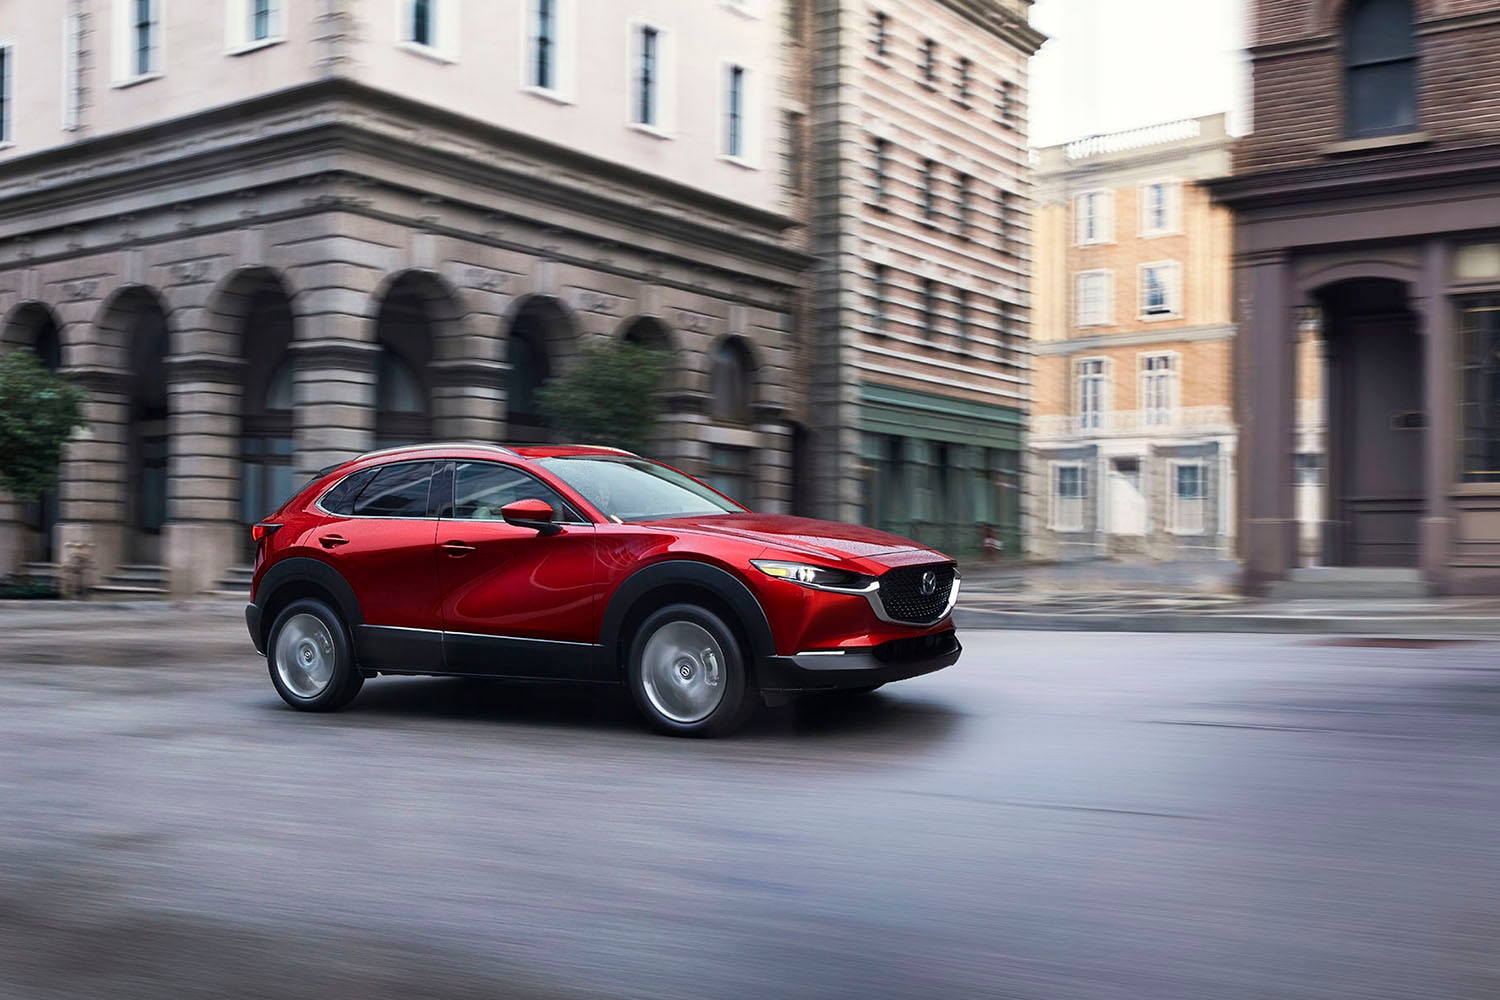 2023 Mazda CX-30 in red driving down a city street